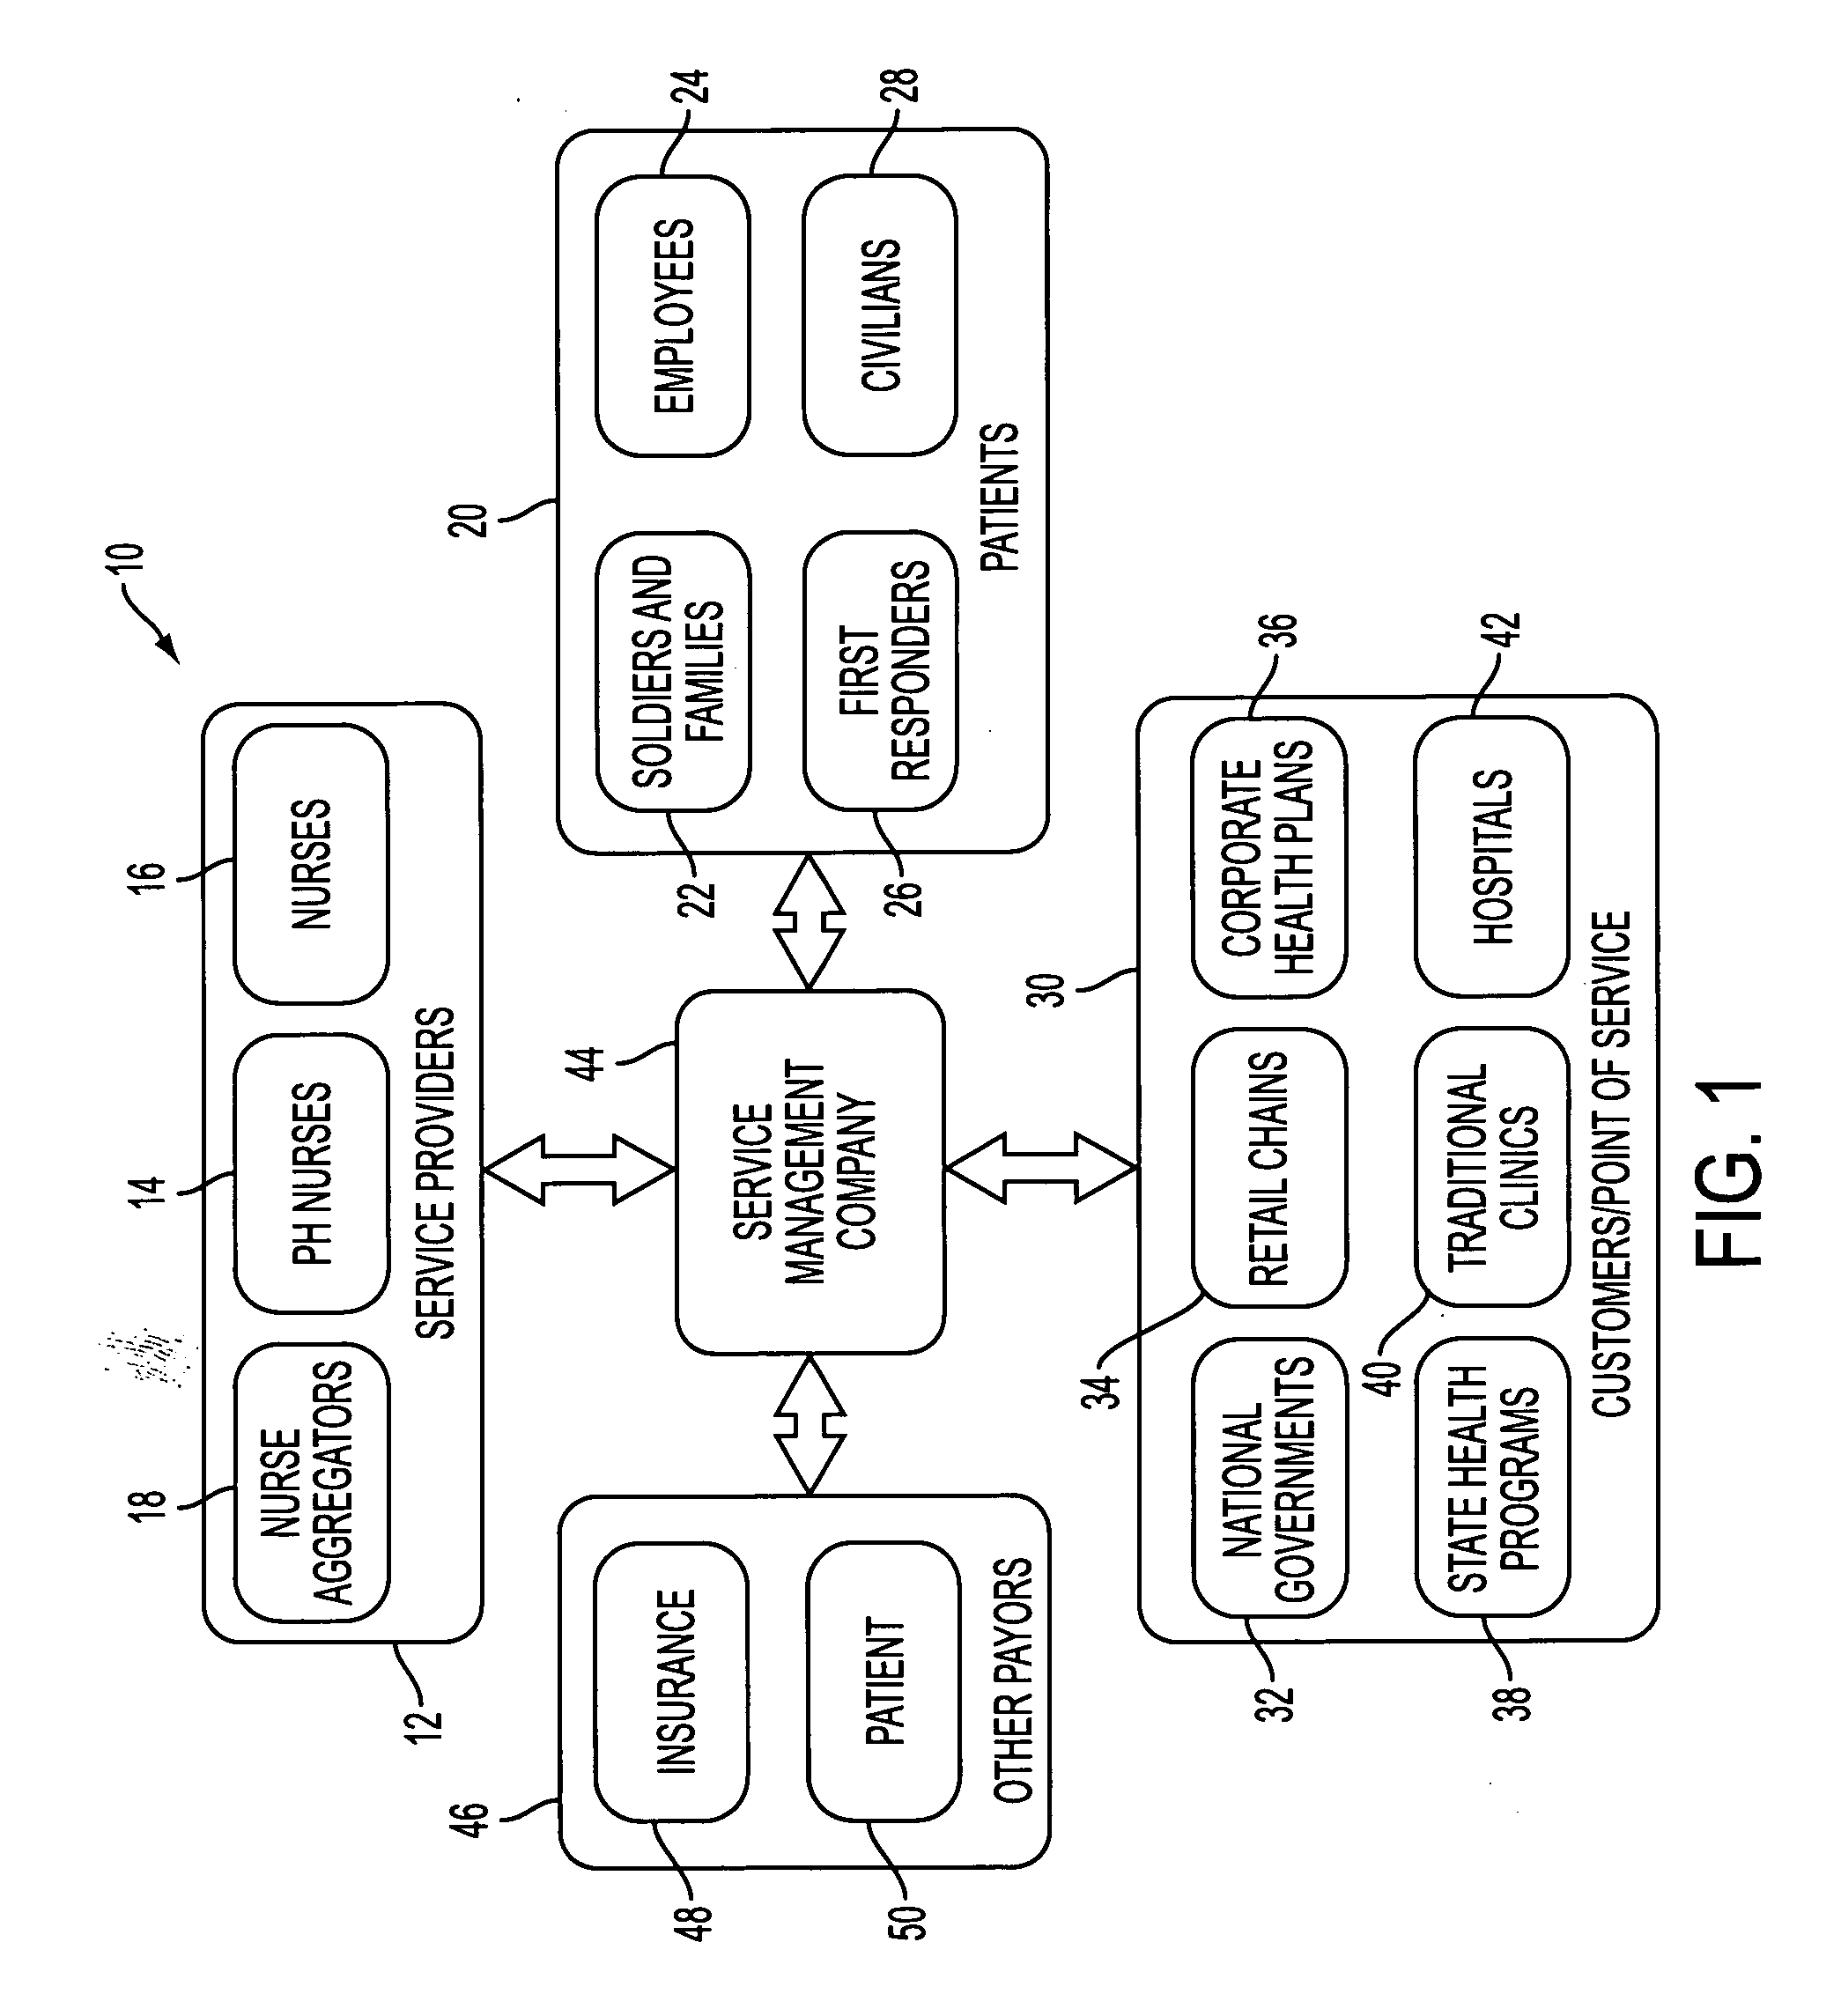 System for collecting, storing,presenting and analyzing immunization data having remote stations in communication with a vaccine and disease database over a network